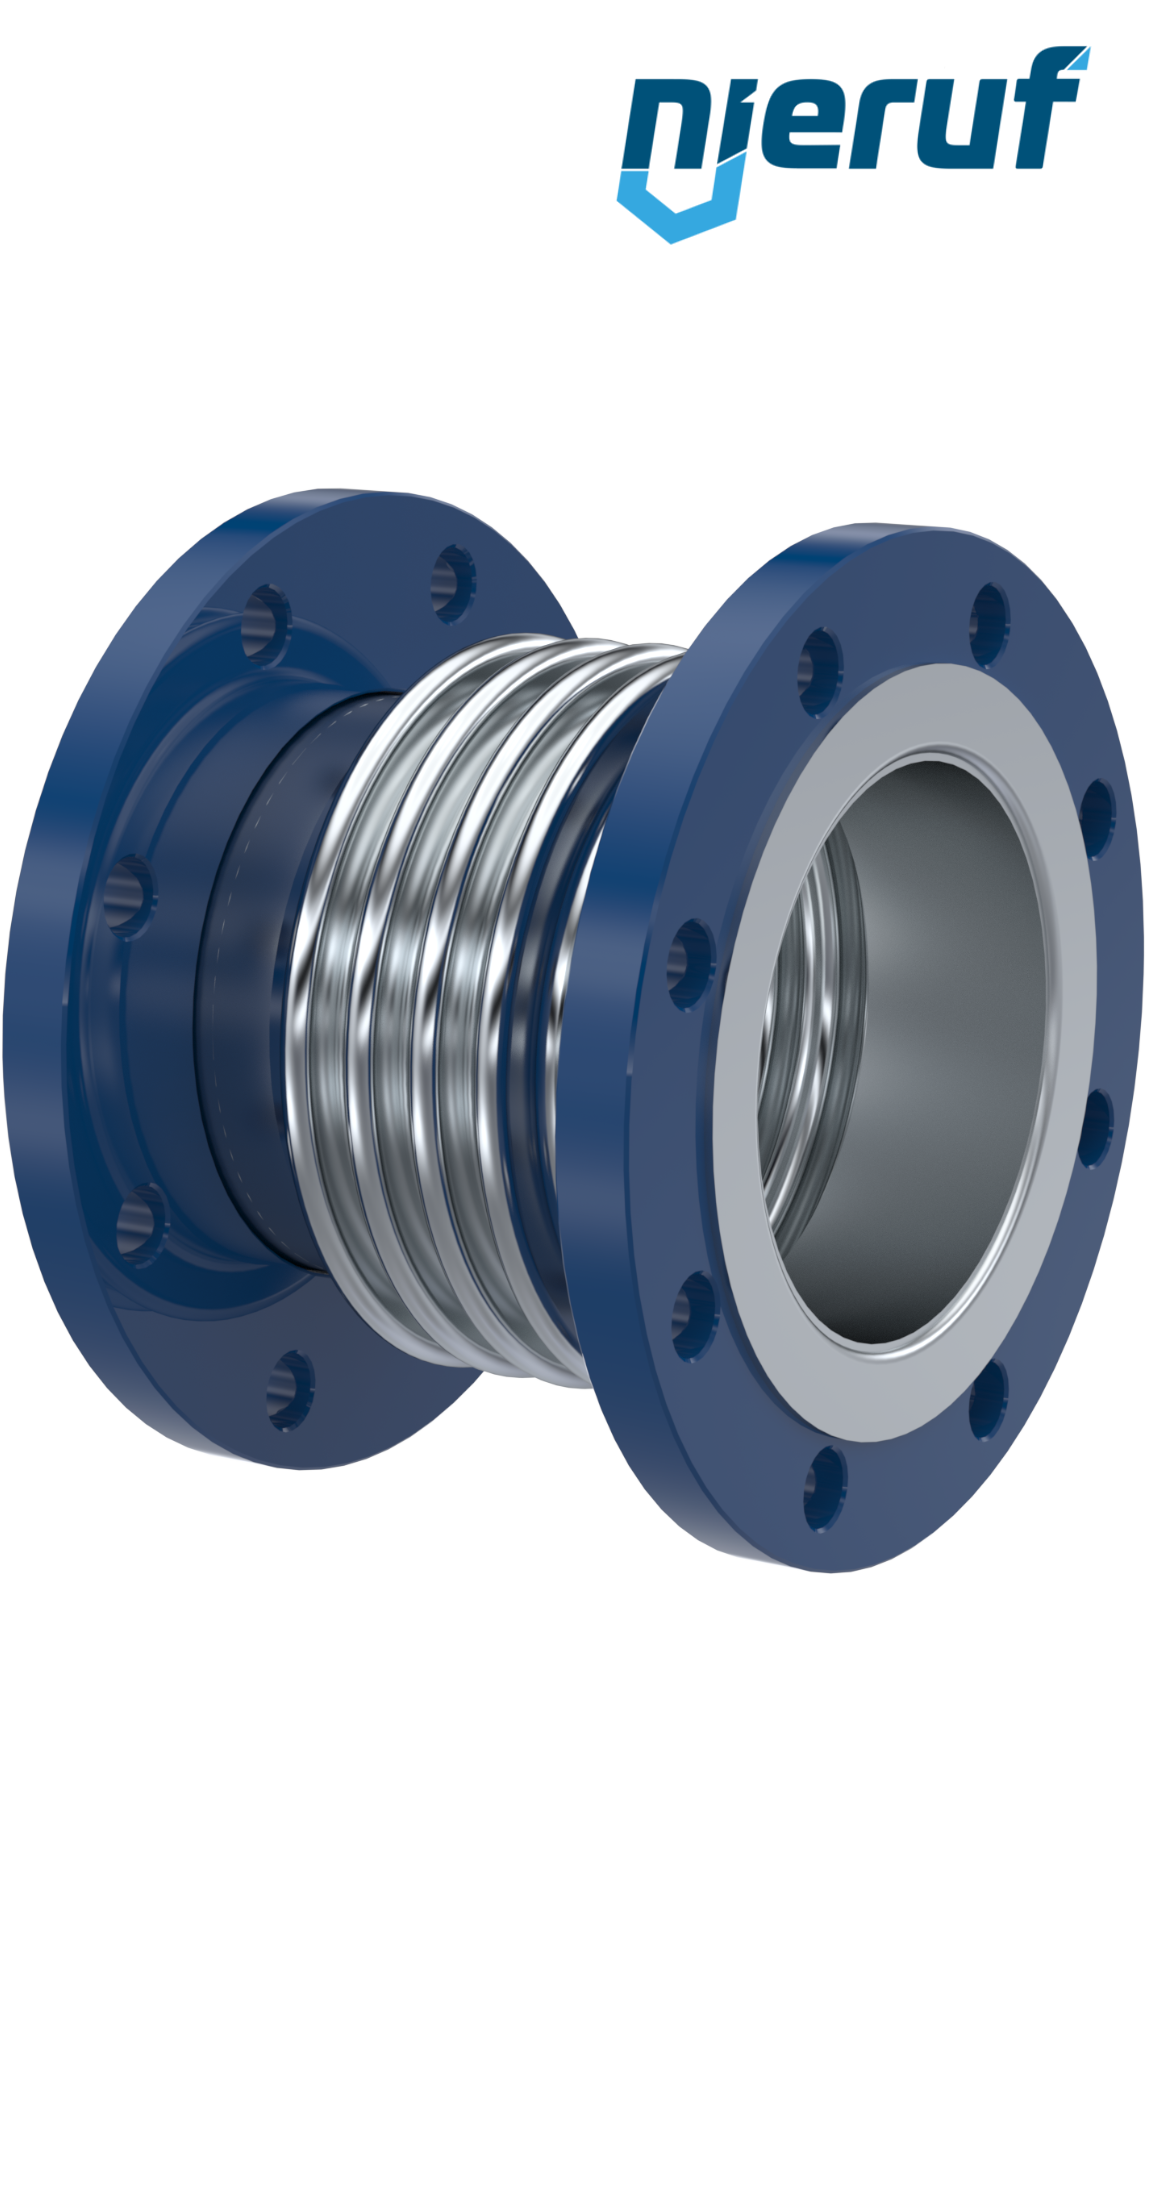 Axial expansion joint DN200 type KP05 flared flanges and stainless steel-bellows